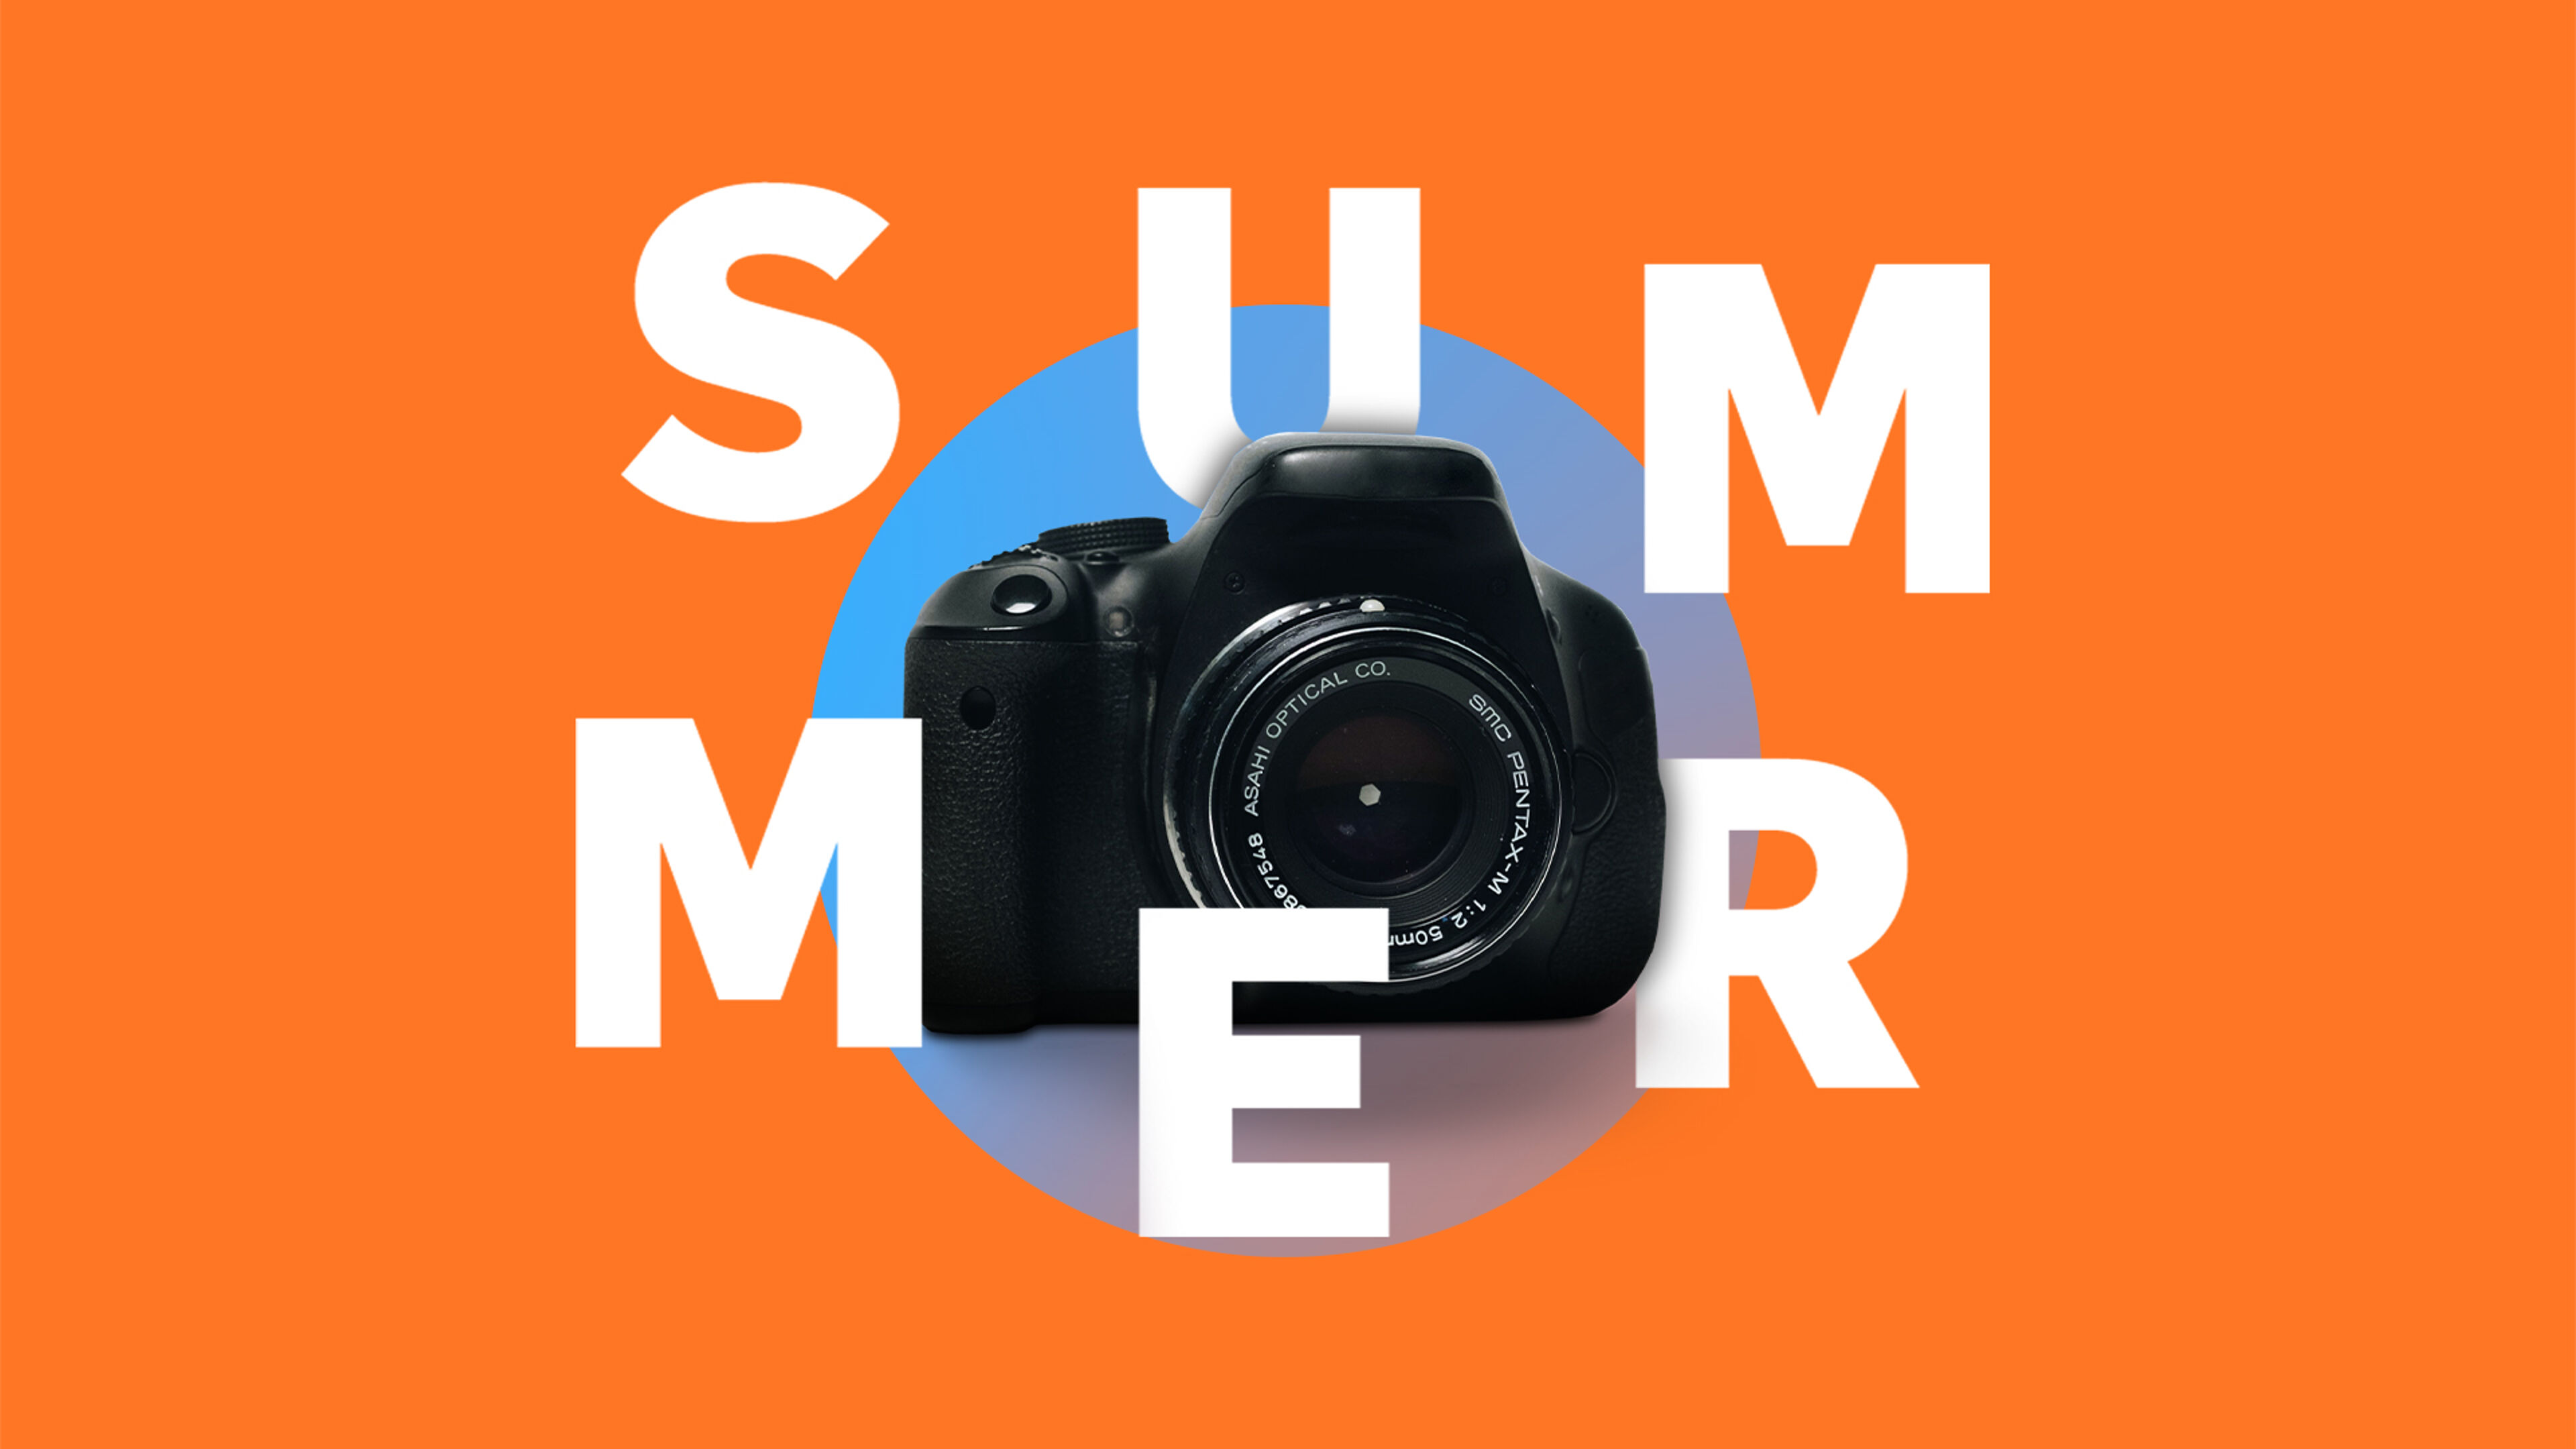 A sleek camera against an orange backdrop with the word 'SUMMER' partially overlaying it.